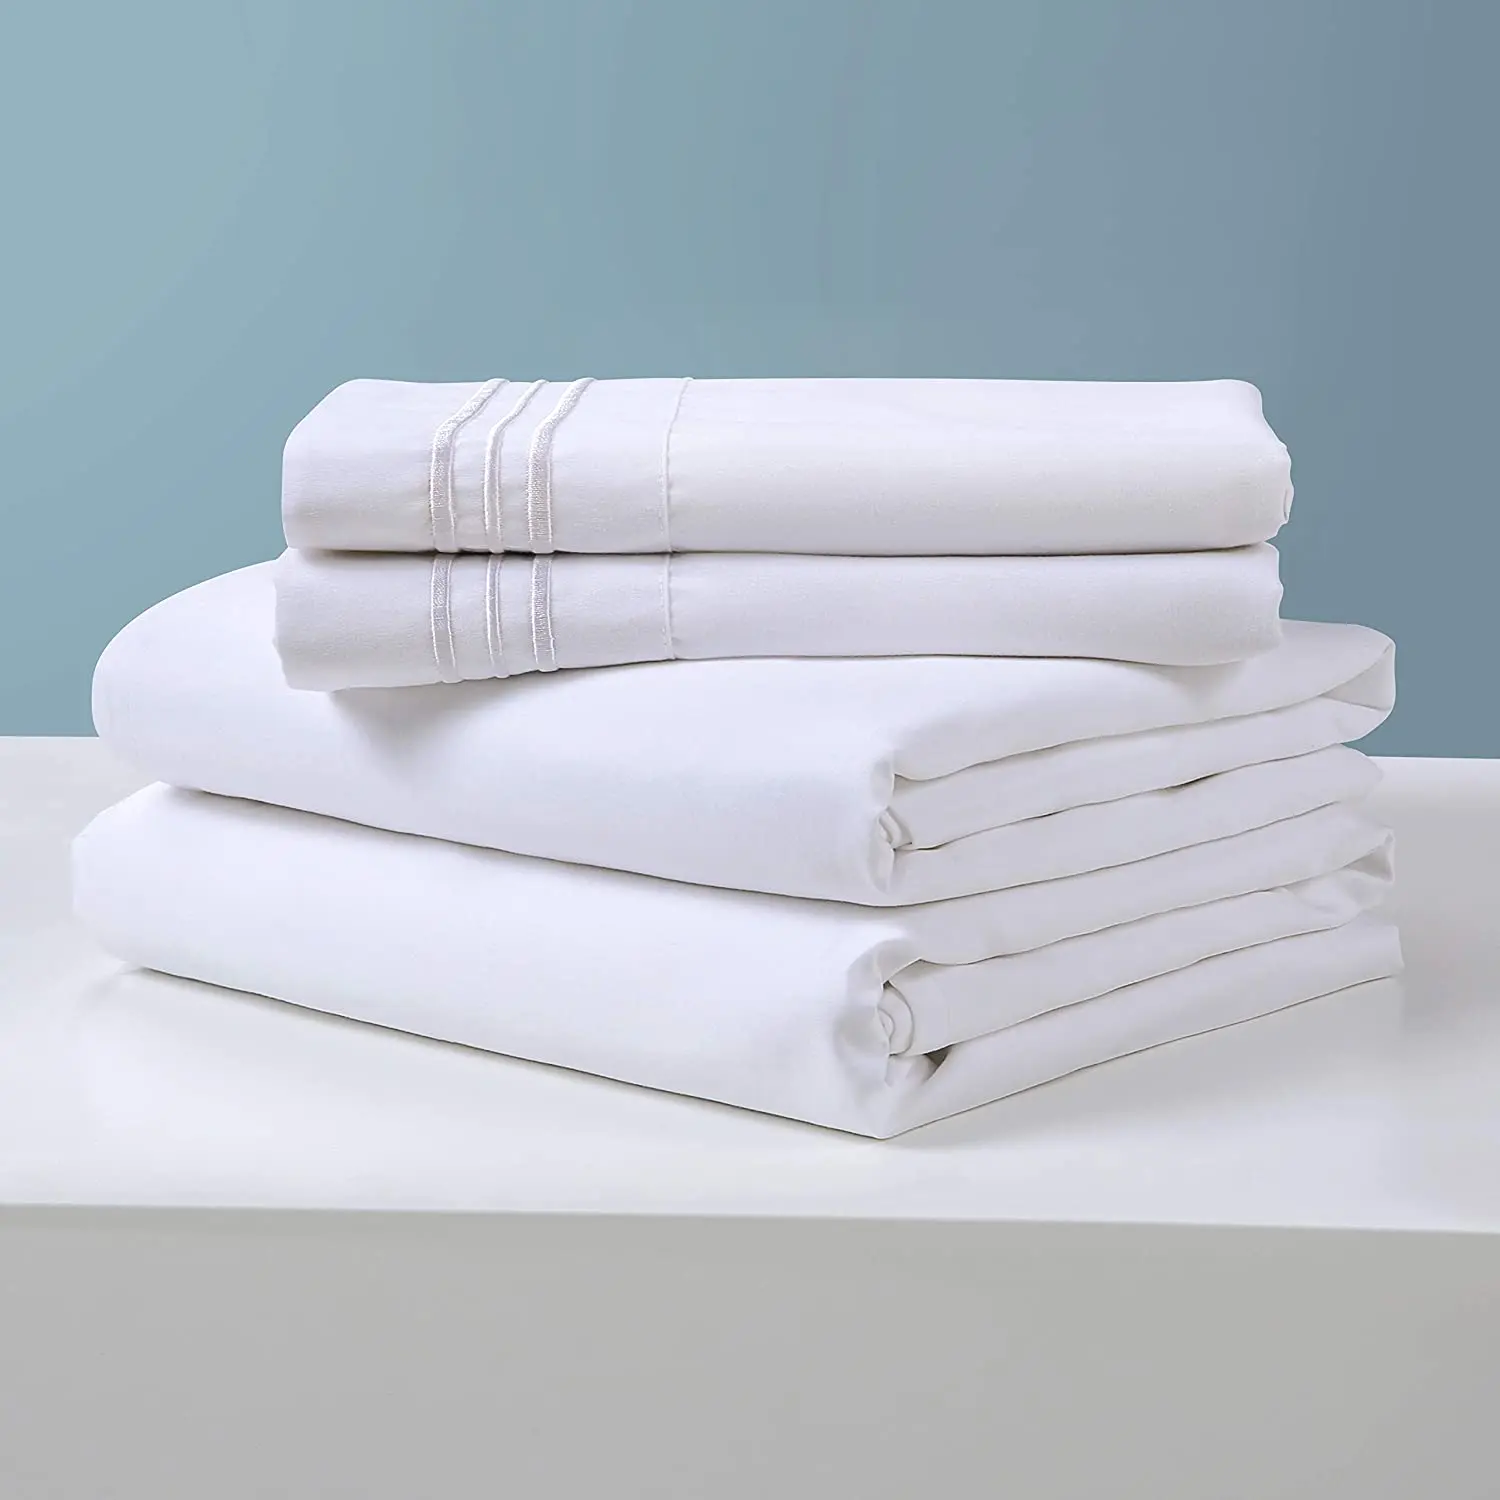 

Queen Bed Sheets Set White Luxury Brushed Microfiber 1800 TC Bed Sheets Wrinkle & Fade Resistant 4 Piece Hotel sheets